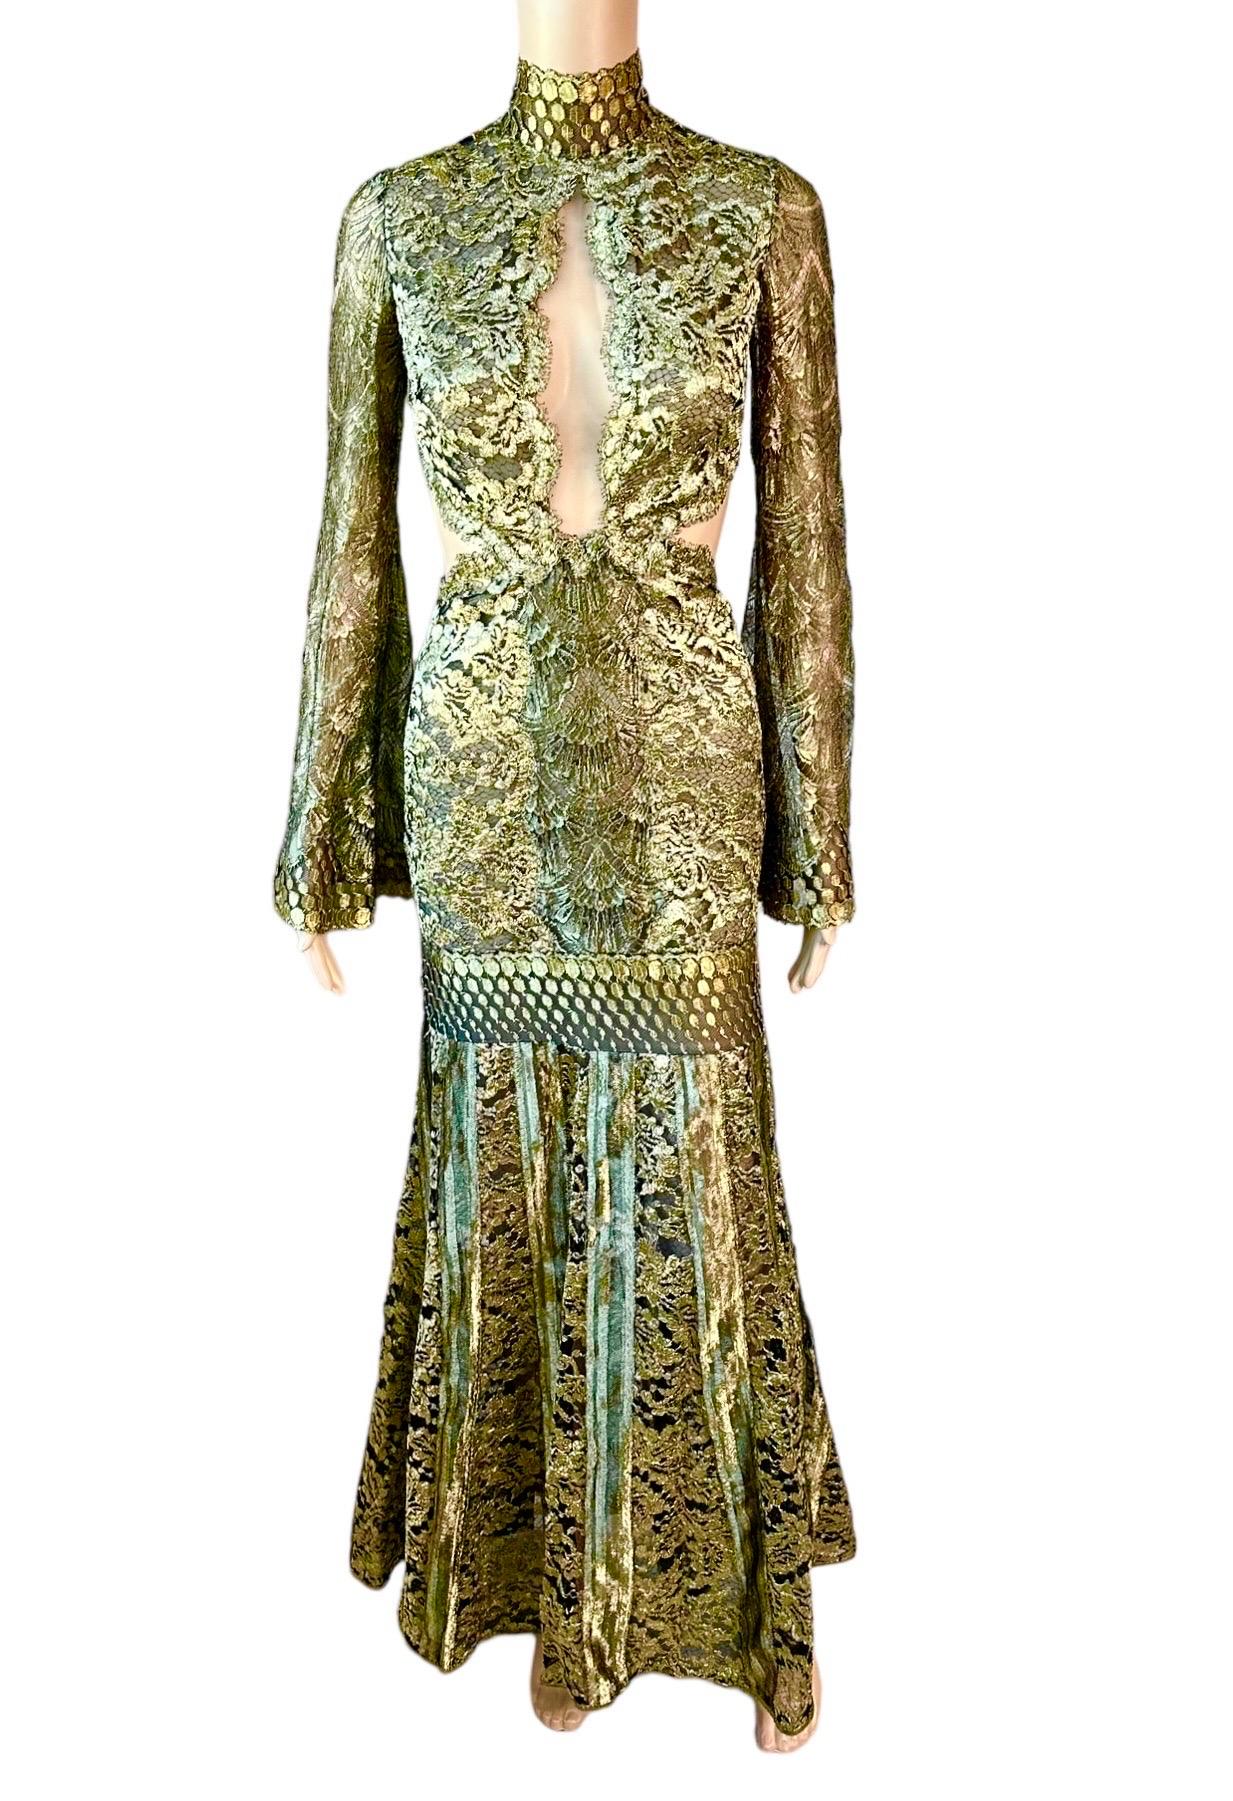 Roberto Cavalli F/W 2016 Runway Gold Sheer Lace Evening Dress Gown In Excellent Condition For Sale In Naples, FL